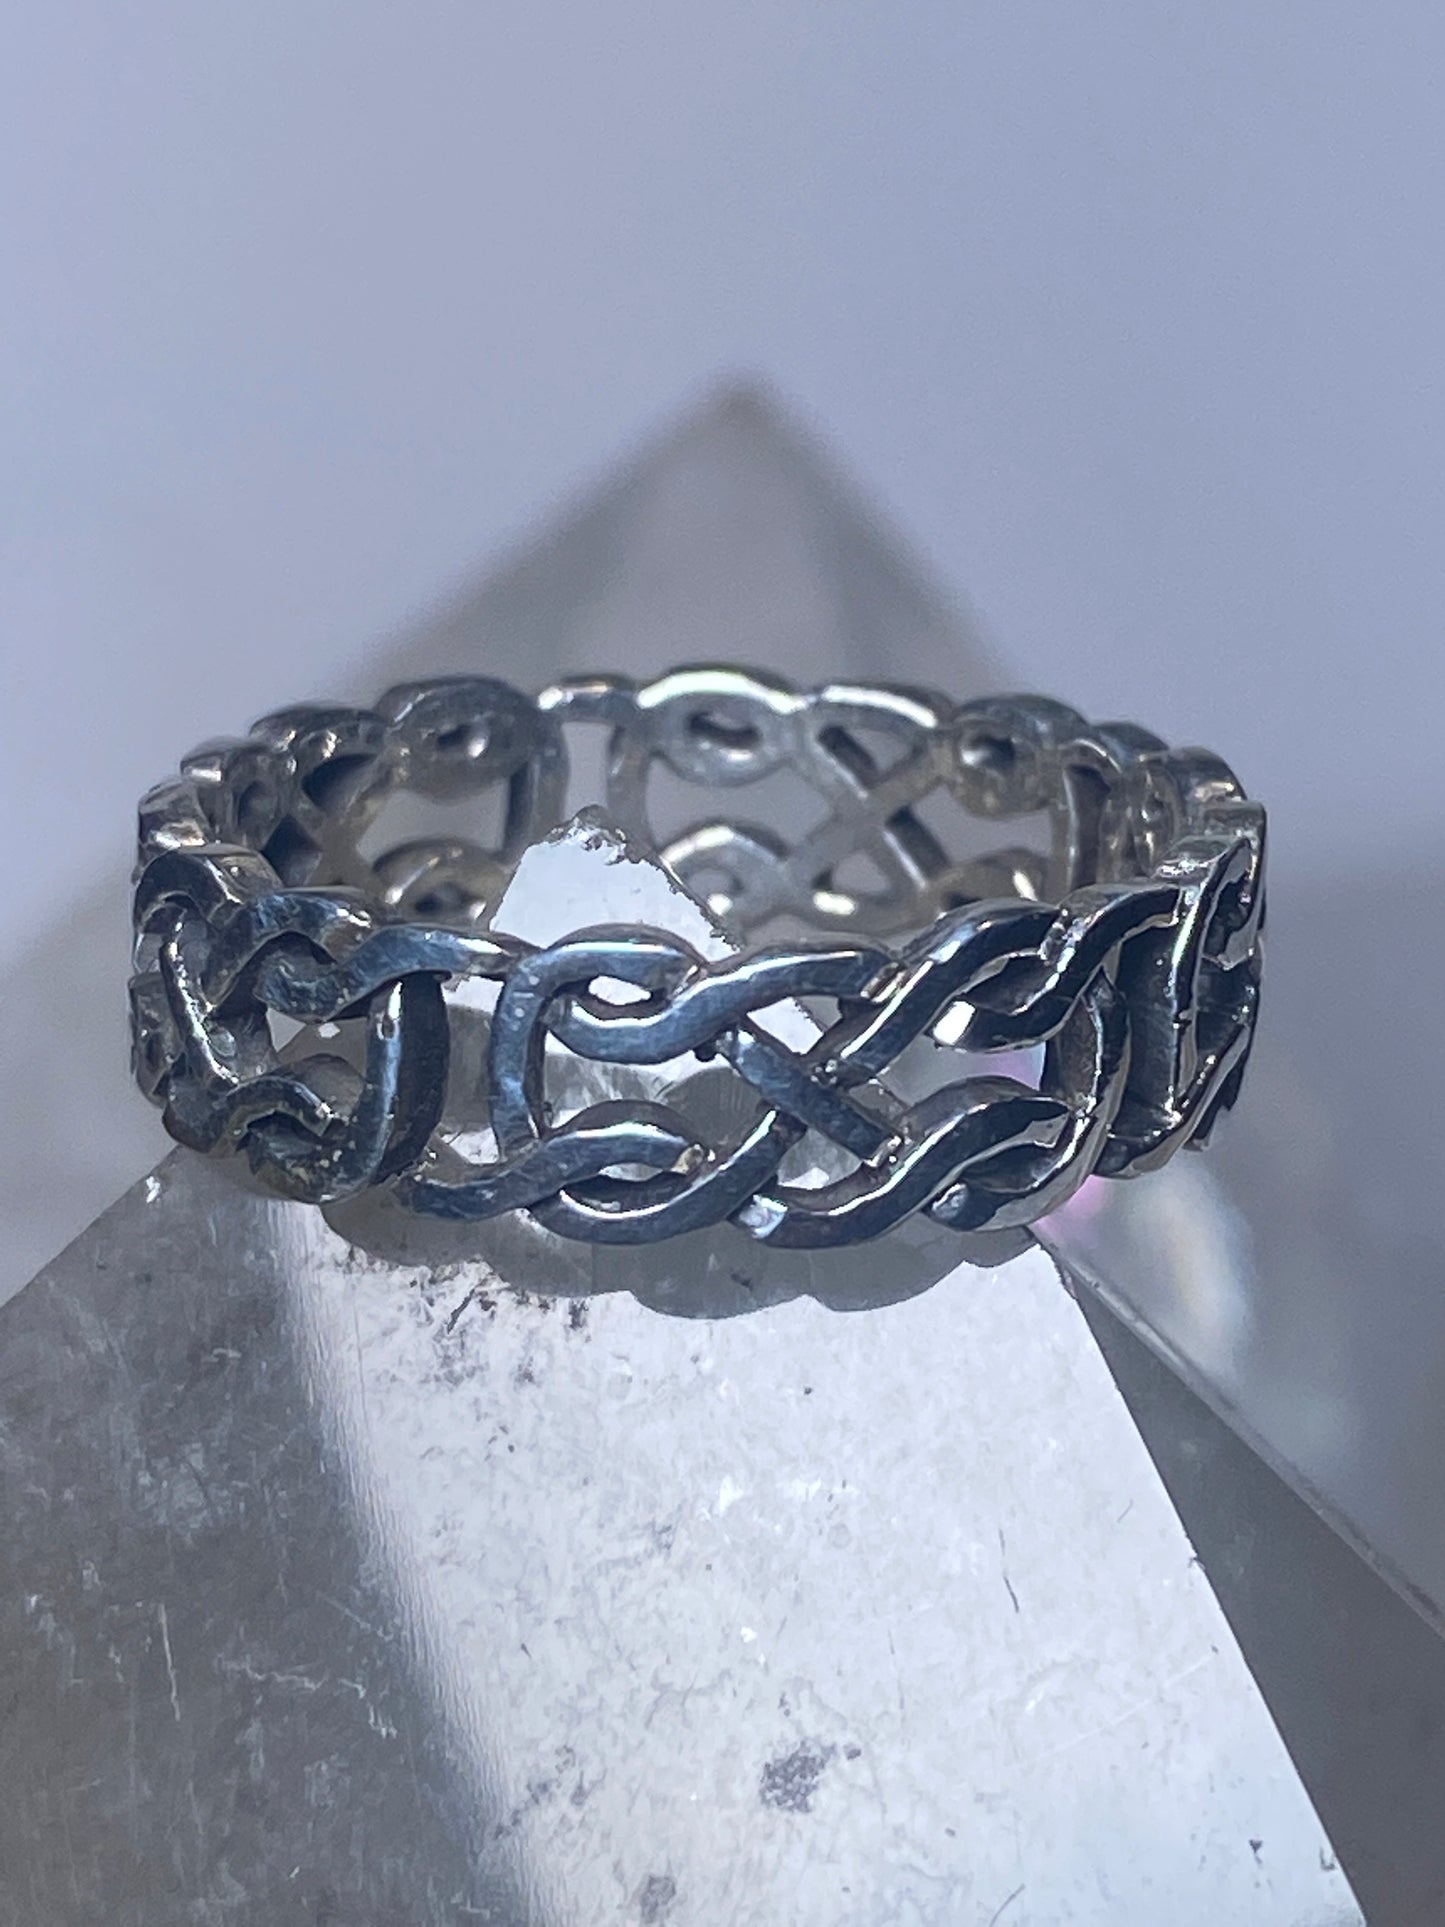 Celtic knot ring size 9.75 wedding band sterling silver men women